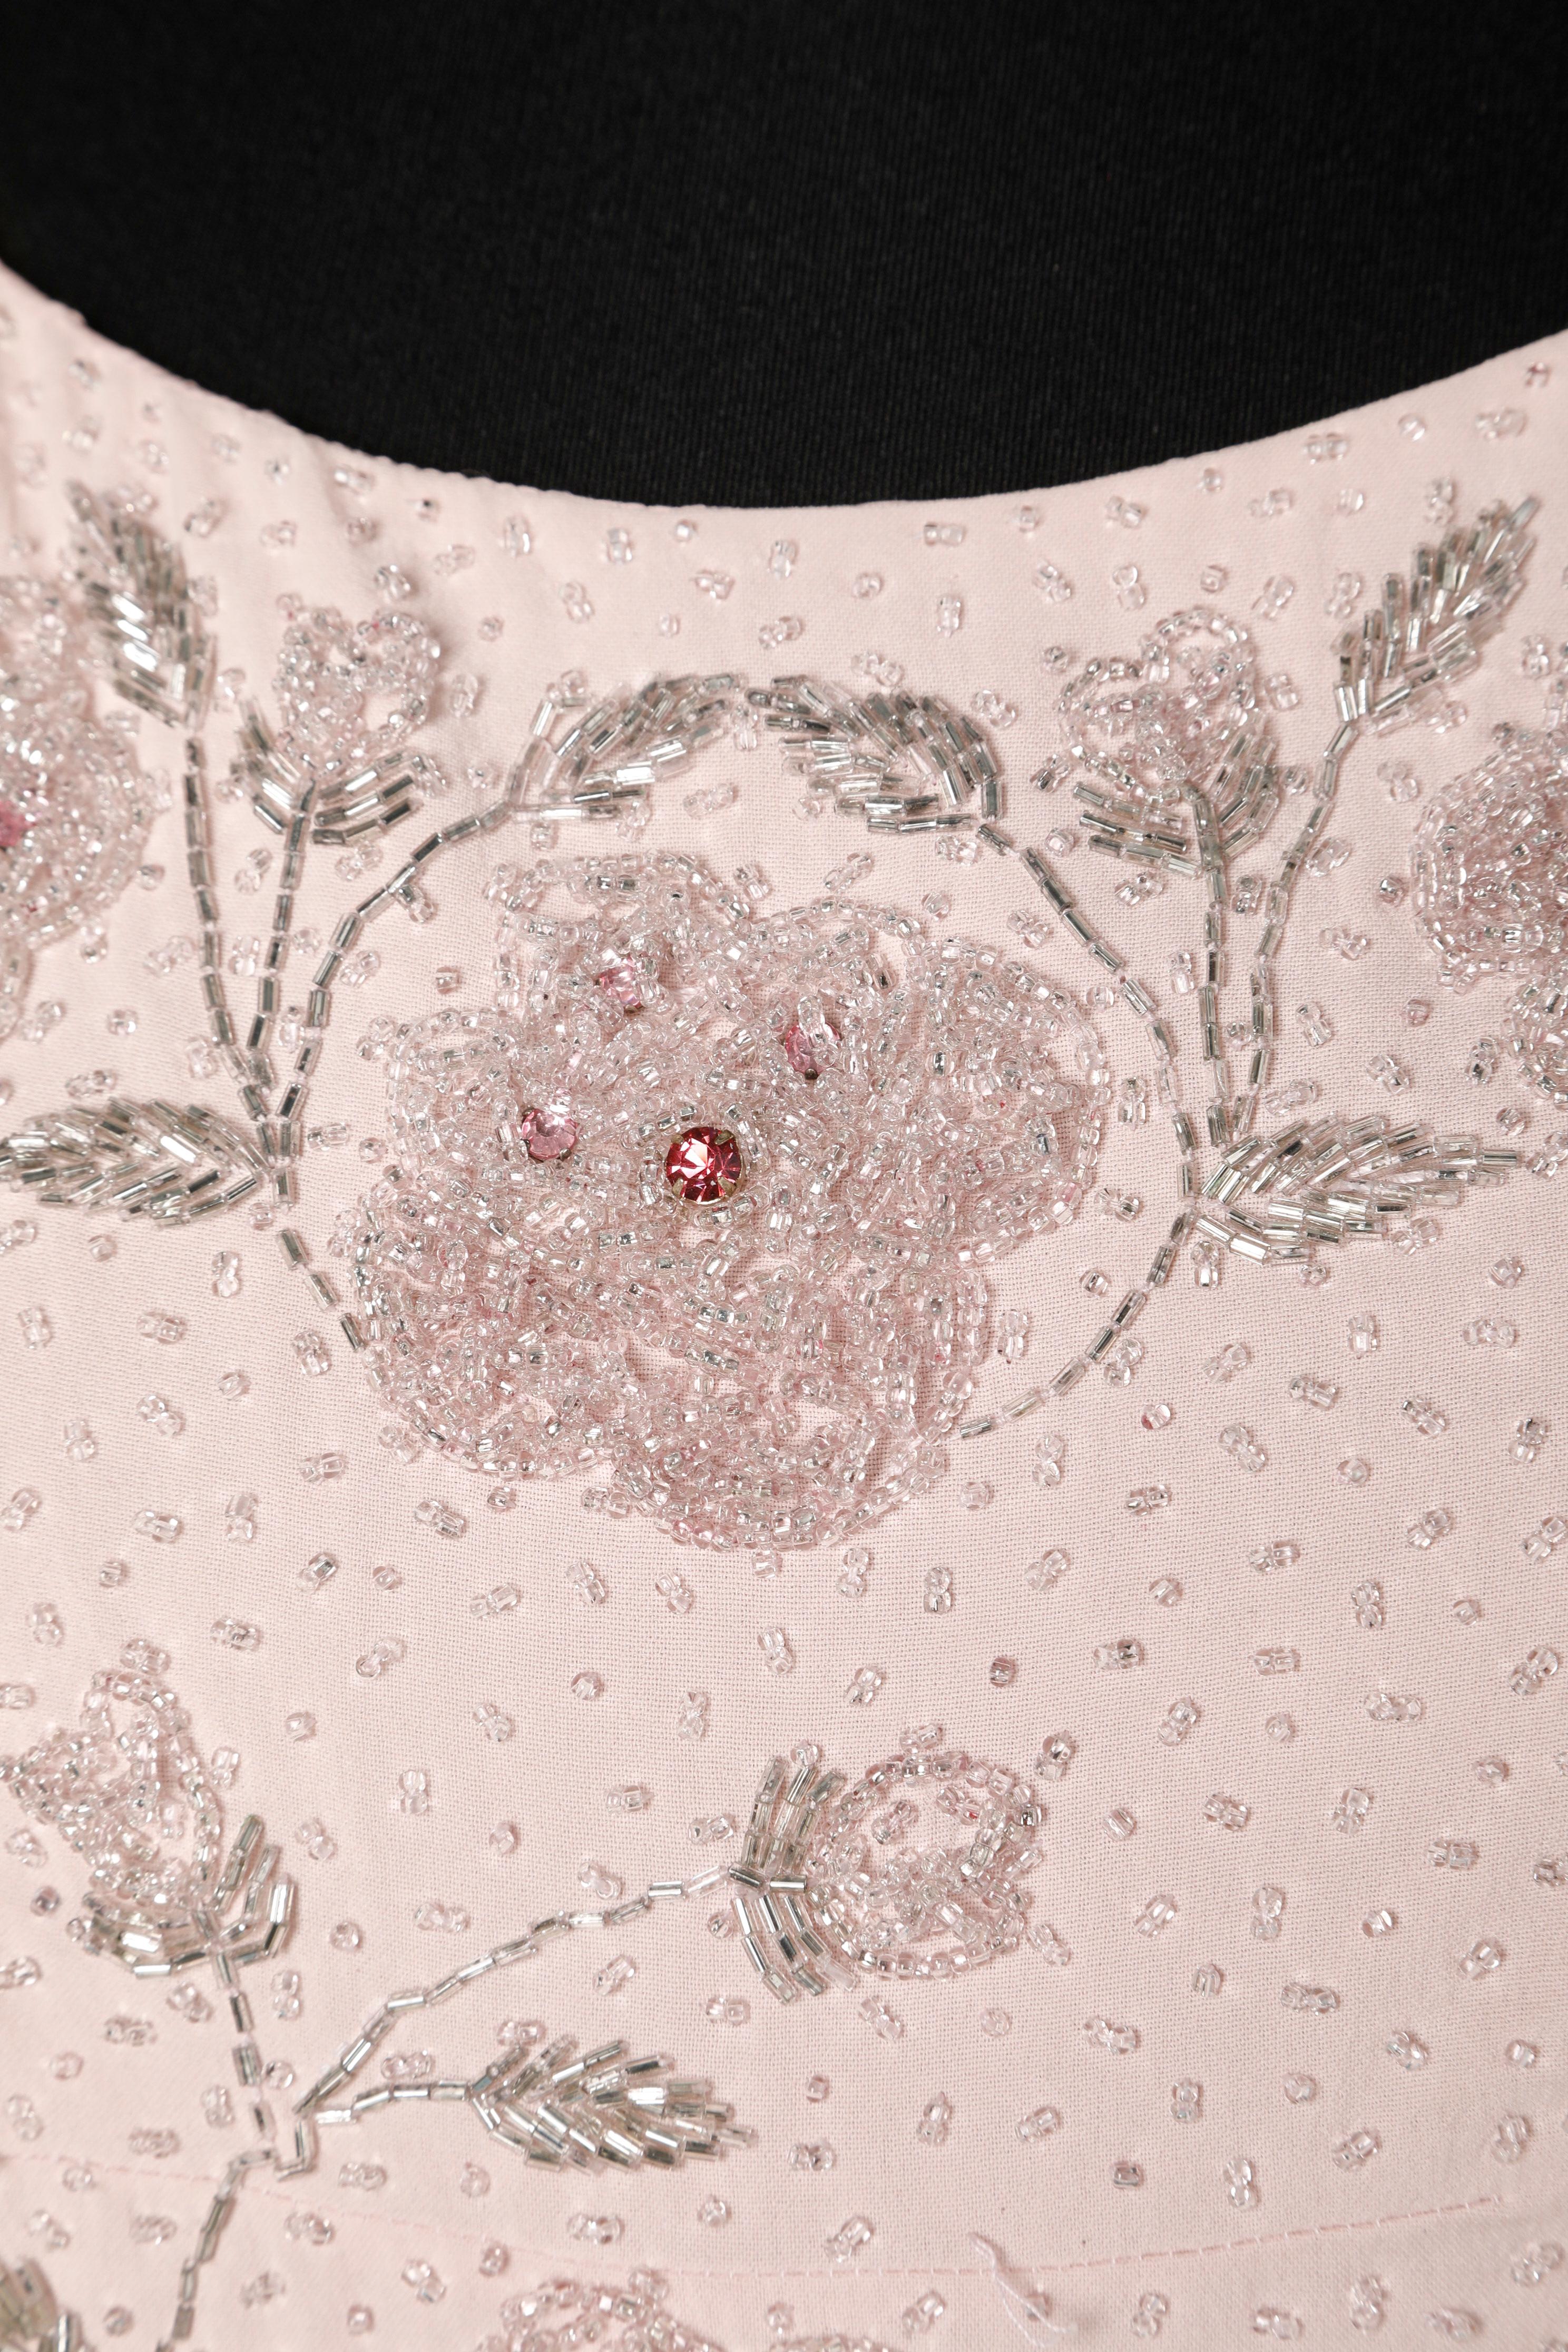 Pale pink evening dress with embroideries and rhinestone.
SIZE L (Fr 40)